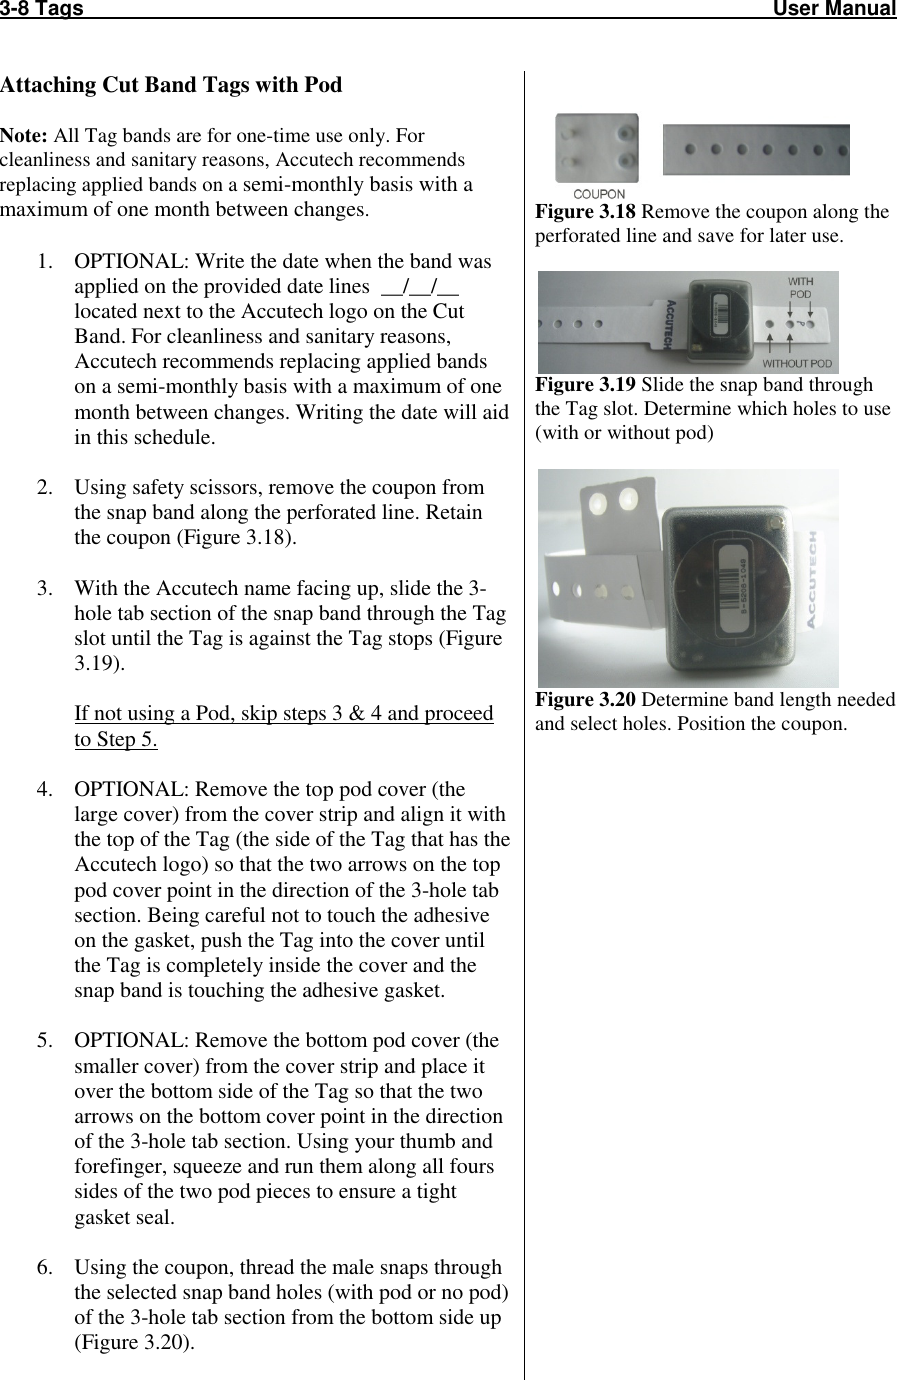 3-8 Tags                                                                                                                       User Manual    Attaching Cut Band Tags with Pod  Note: All Tag bands are for one-time use only. For cleanliness and sanitary reasons, Accutech recommends replacing applied bands on a semi-monthly basis with a maximum of one month between changes.  1. OPTIONAL: Write the date when the band was applied on the provided date lines  __/__/__ located next to the Accutech logo on the Cut Band. For cleanliness and sanitary reasons, Accutech recommends replacing applied bands on a semi-monthly basis with a maximum of one month between changes. Writing the date will aid in this schedule.  2. Using safety scissors, remove the coupon from the snap band along the perforated line. Retain the coupon (Figure 3.18).  3. With the Accutech name facing up, slide the 3-hole tab section of the snap band through the Tag slot until the Tag is against the Tag stops (Figure 3.19).  If not using a Pod, skip steps 3 &amp; 4 and proceed to Step 5.  4. OPTIONAL: Remove the top pod cover (the large cover) from the cover strip and align it with the top of the Tag (the side of the Tag that has the Accutech logo) so that the two arrows on the top pod cover point in the direction of the 3-hole tab section. Being careful not to touch the adhesive on the gasket, push the Tag into the cover until the Tag is completely inside the cover and the snap band is touching the adhesive gasket.  5. OPTIONAL: Remove the bottom pod cover (the smaller cover) from the cover strip and place it over the bottom side of the Tag so that the two arrows on the bottom cover point in the direction of the 3-hole tab section. Using your thumb and forefinger, squeeze and run them along all fours sides of the two pod pieces to ensure a tight gasket seal.  6. Using the coupon, thread the male snaps through the selected snap band holes (with pod or no pod) of the 3-hole tab section from the bottom side up (Figure 3.20).    Figure 3.18 Remove the coupon along the perforated line and save for later use.   Figure 3.19 Slide the snap band through the Tag slot. Determine which holes to use (with or without pod)   Figure 3.20 Determine band length needed and select holes. Position the coupon.                    